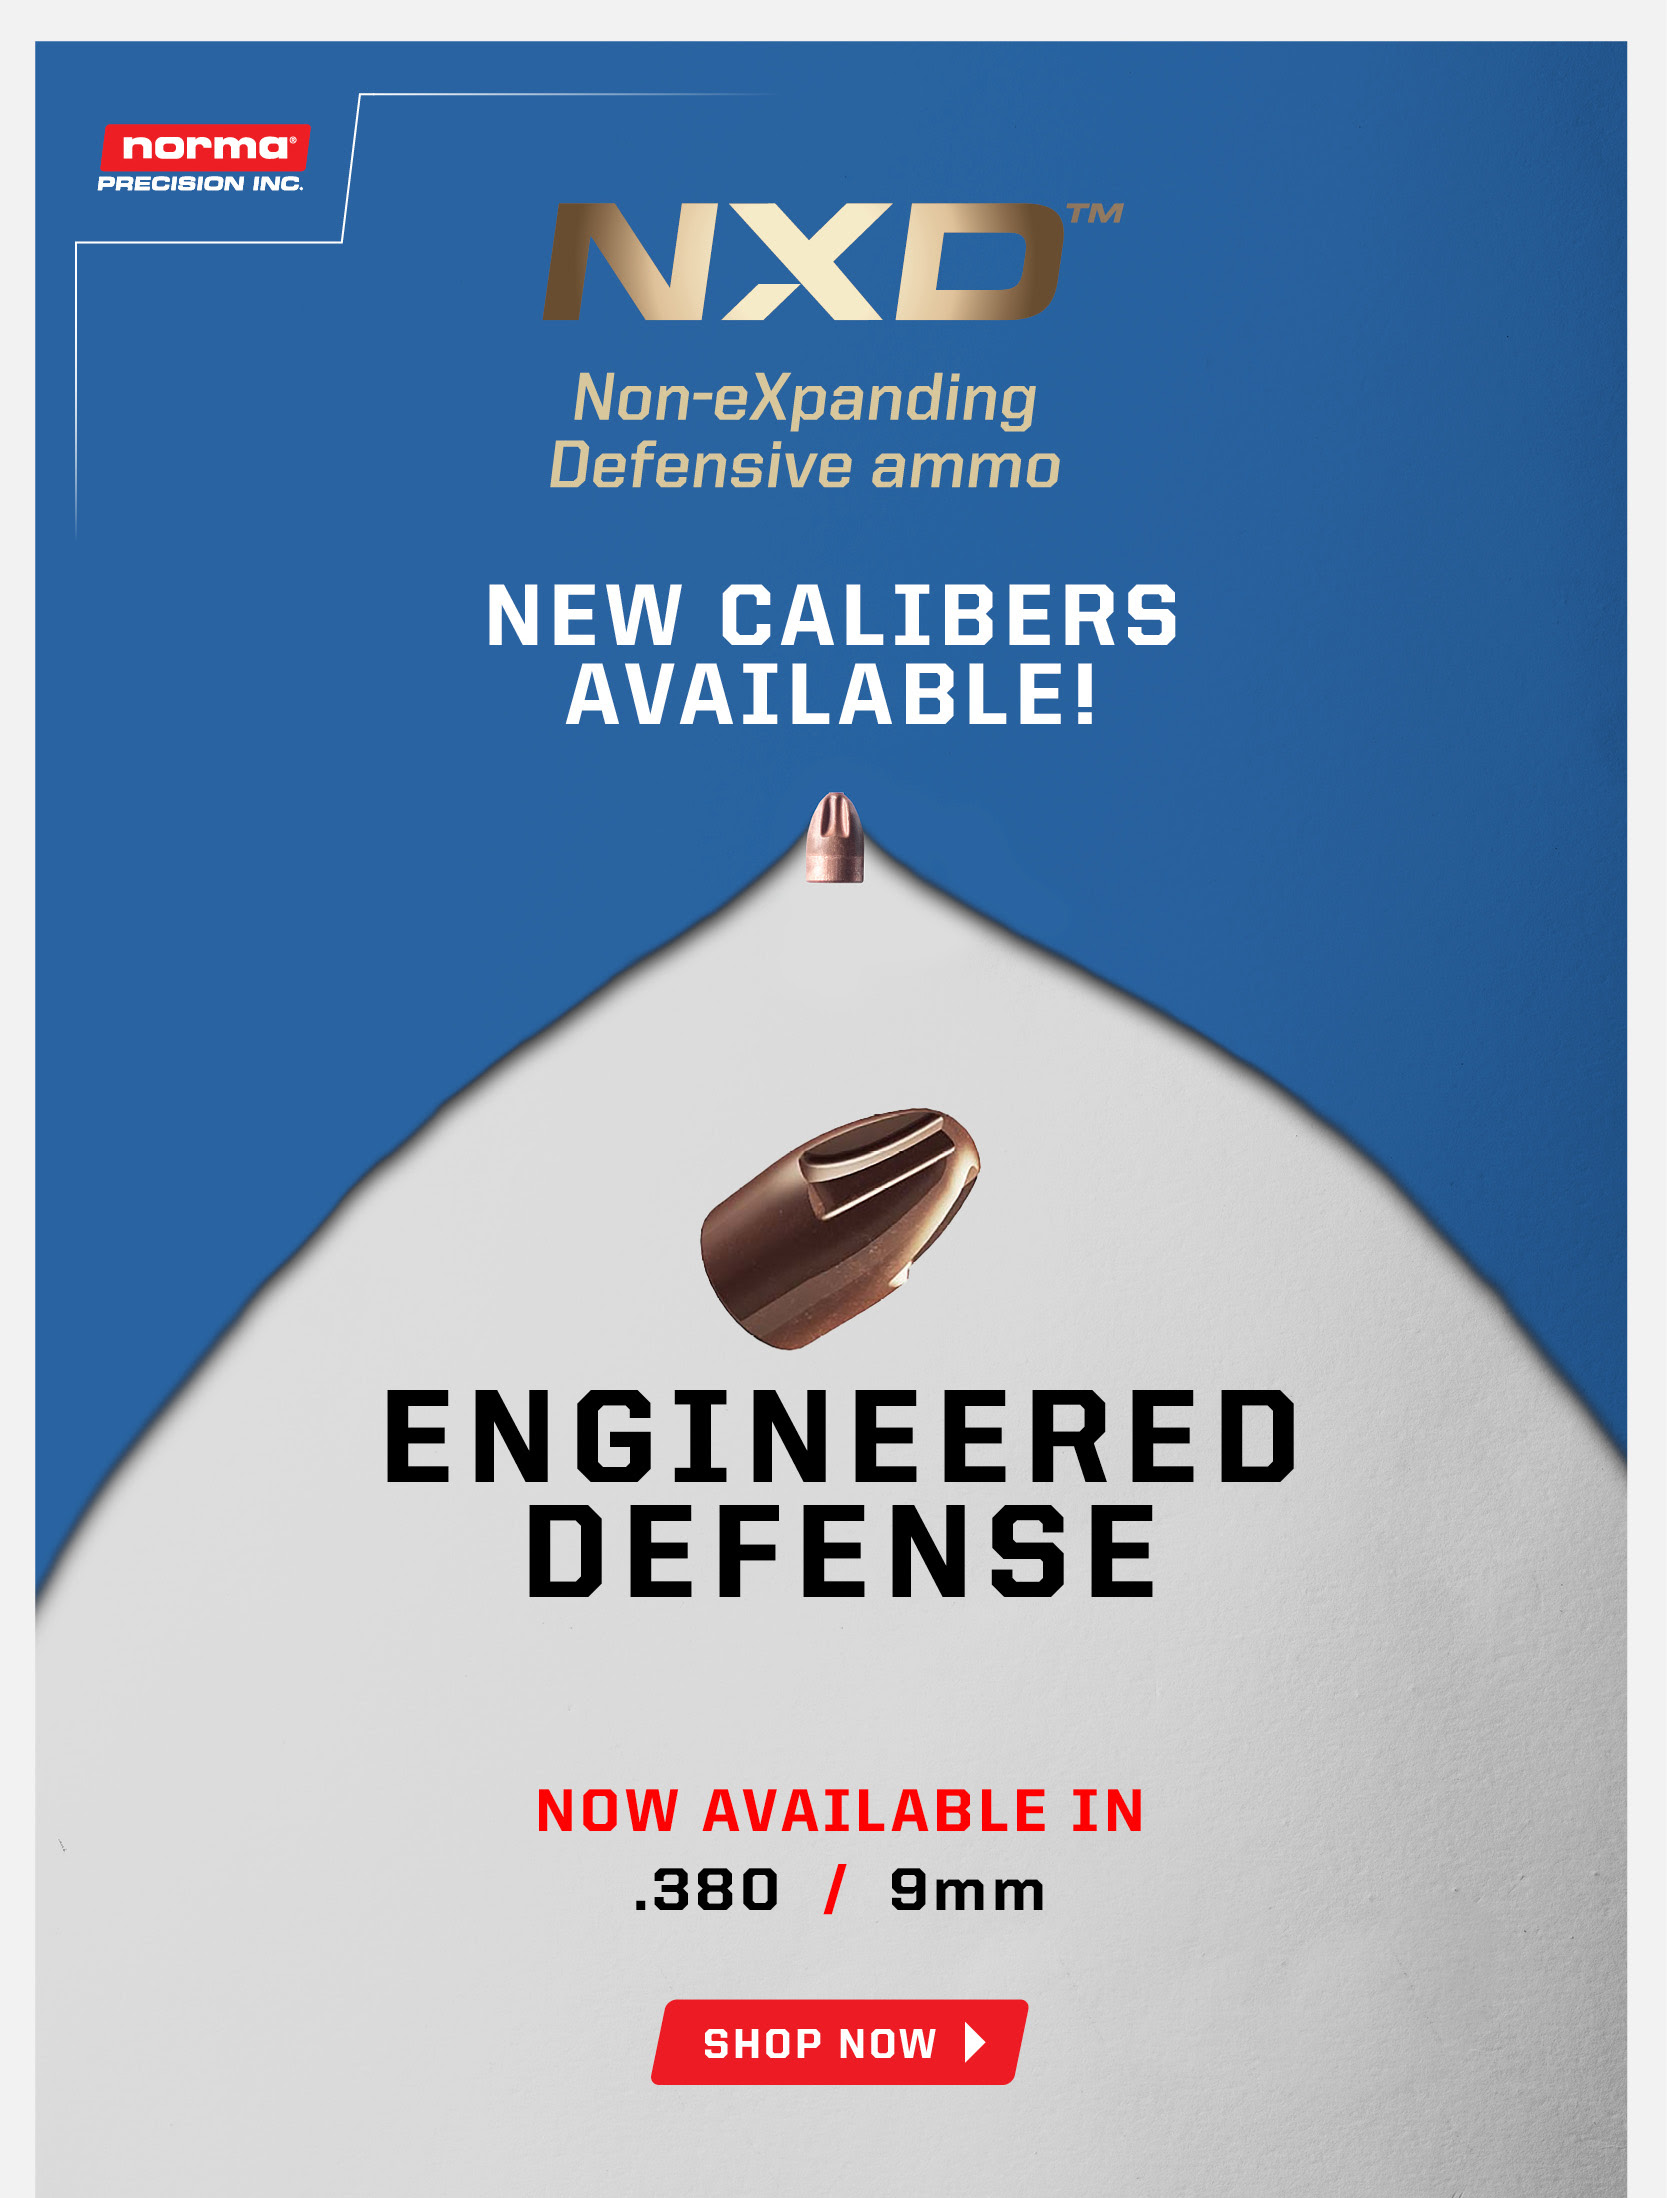 Introducing NXD NEW CALIBERS